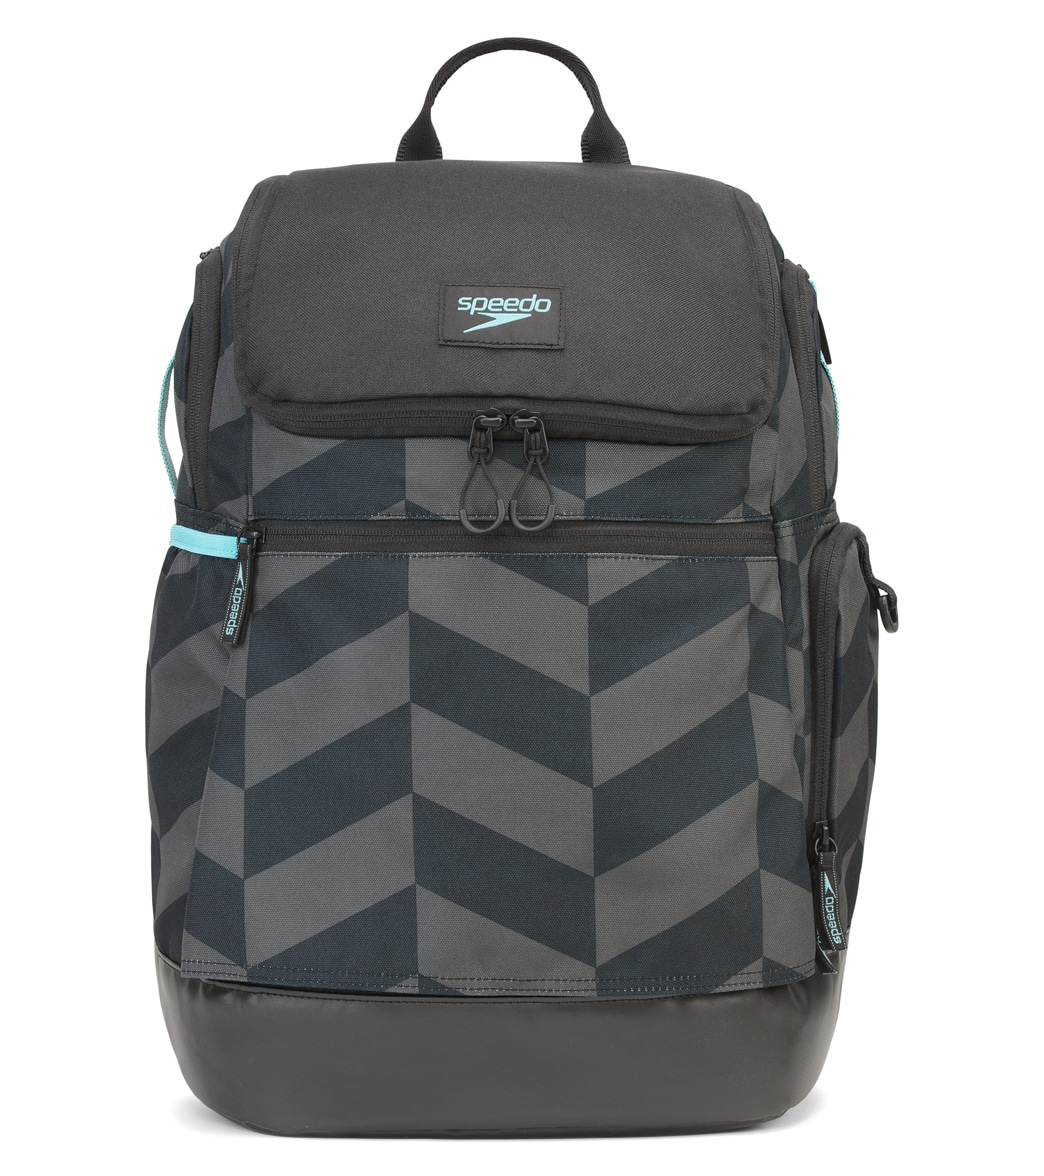 Speedo Printed Teamster 2.0 35L Backpack - Black/Mont Diagonal Checkers - Swimoutlet.com